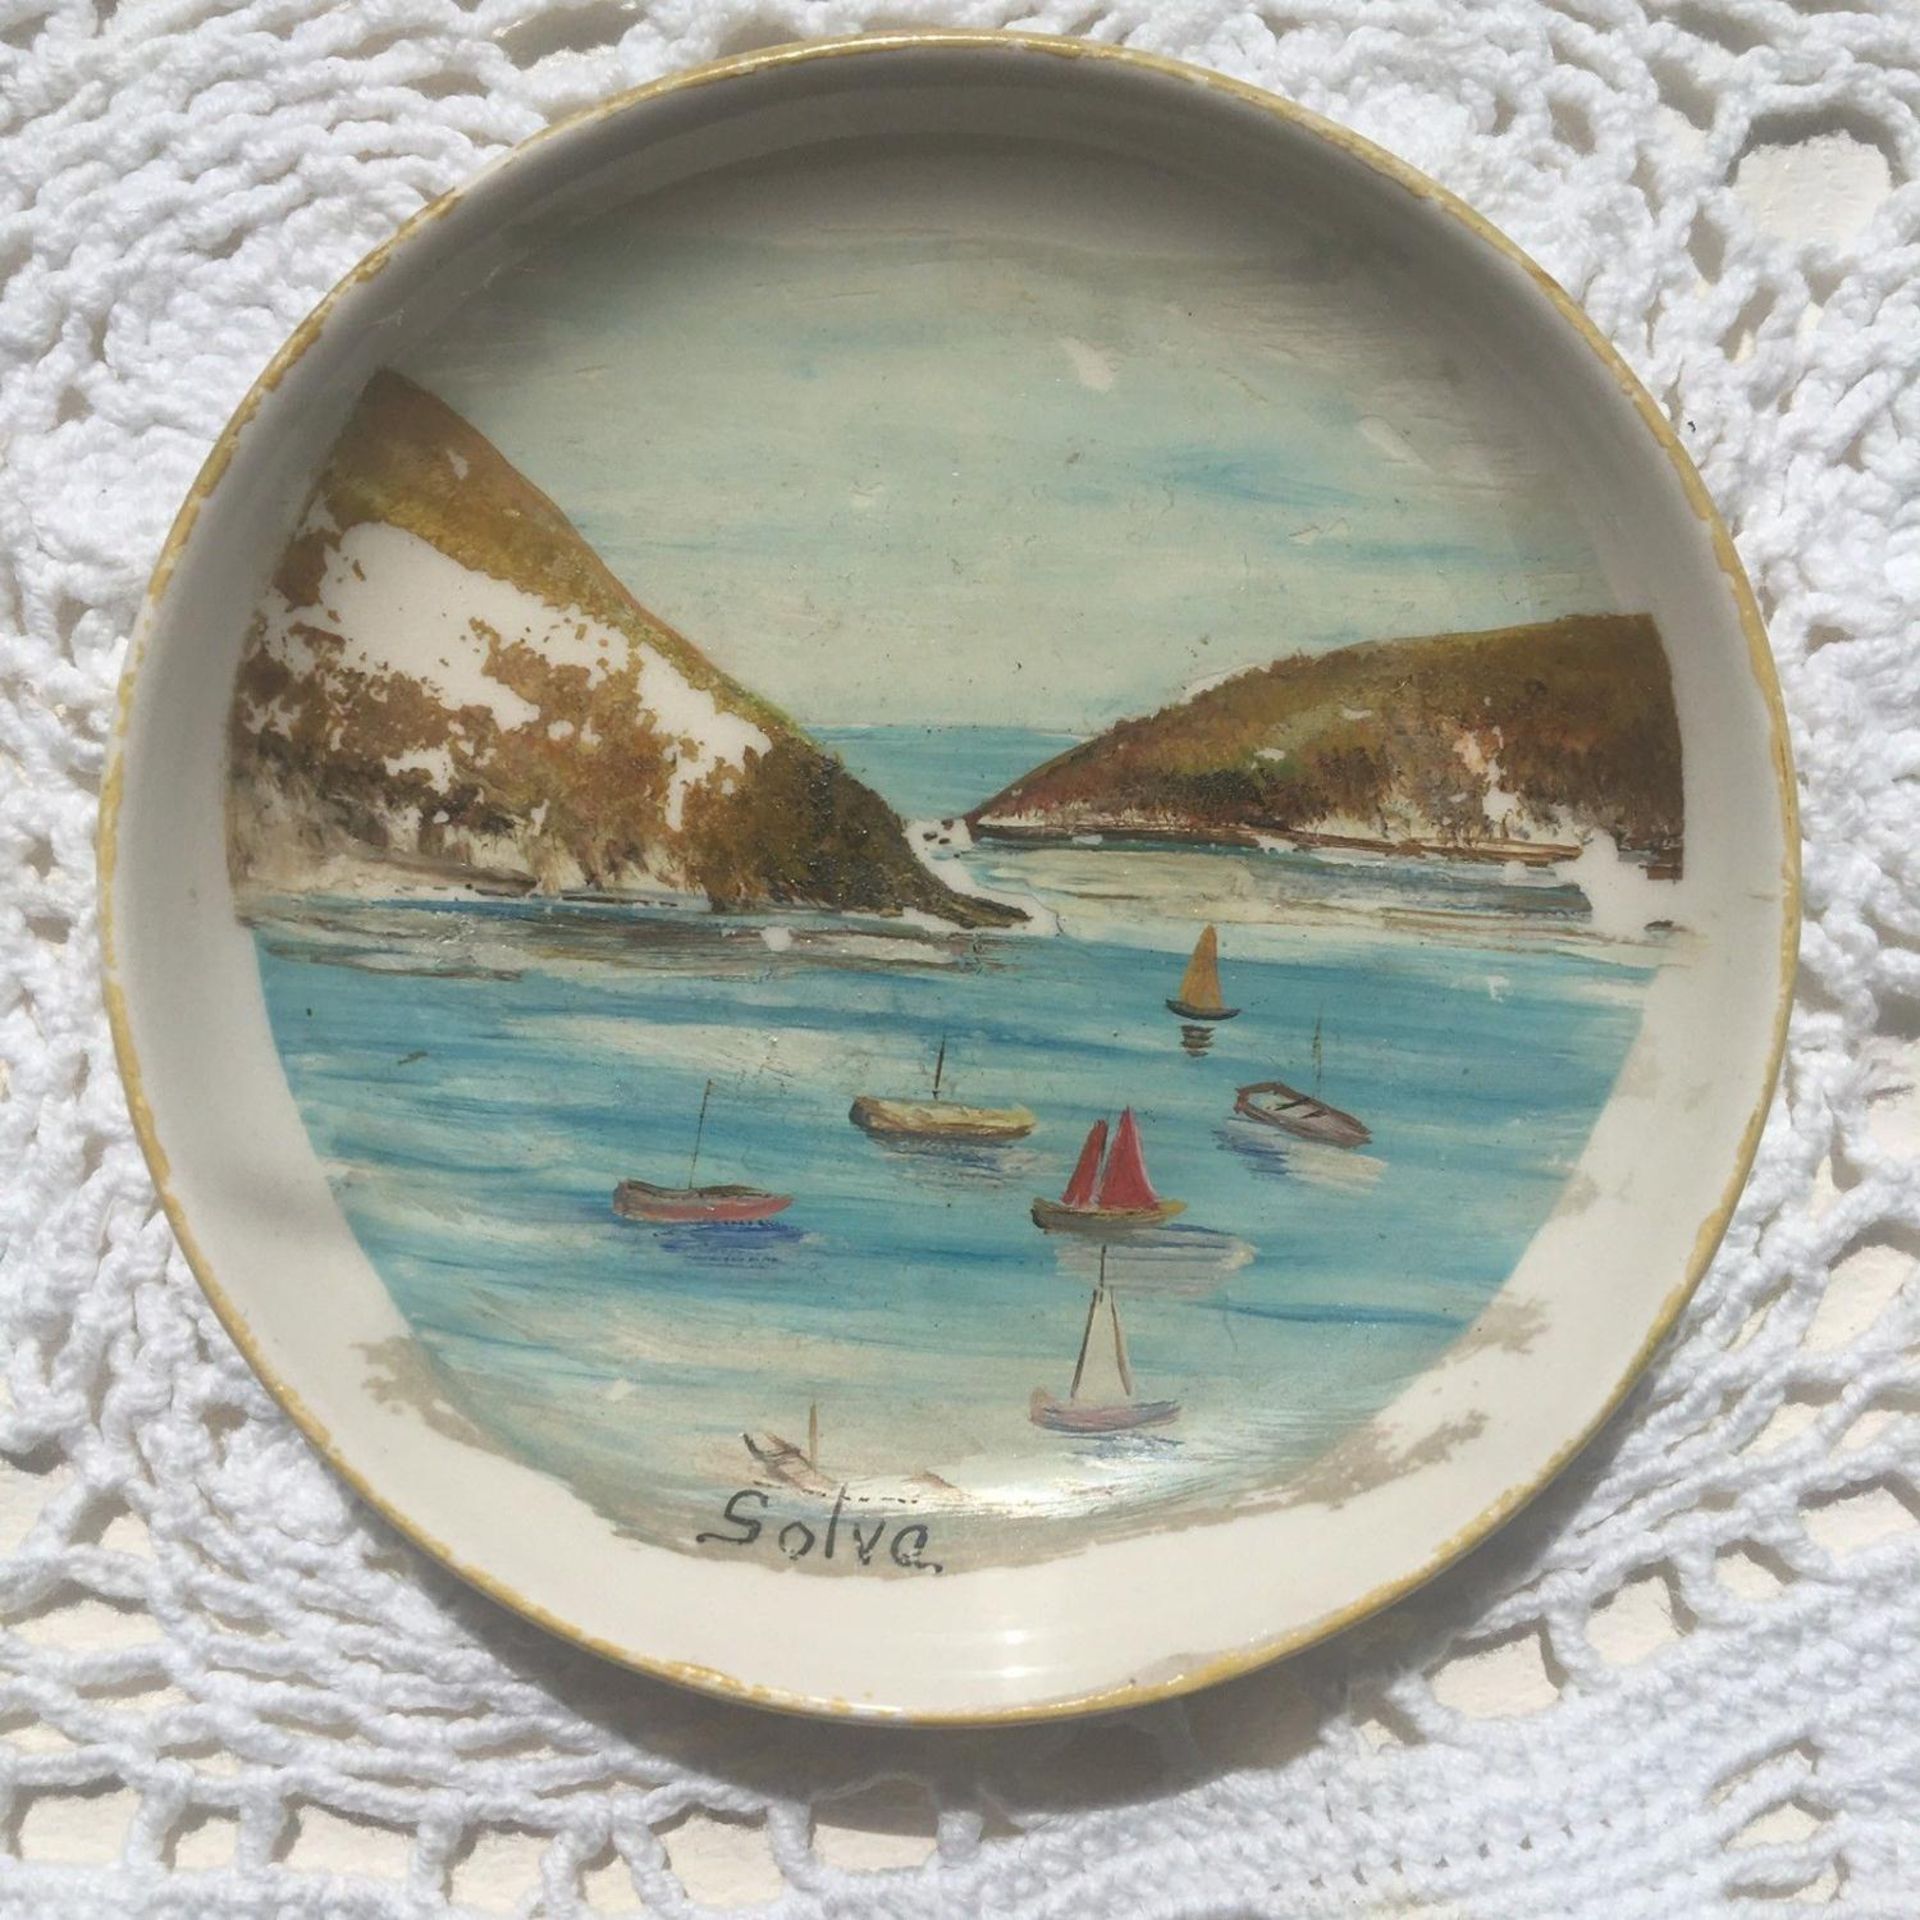 Unsigned painting of Solva Pembrokeshire Wales on a Johnson Brothers small plate